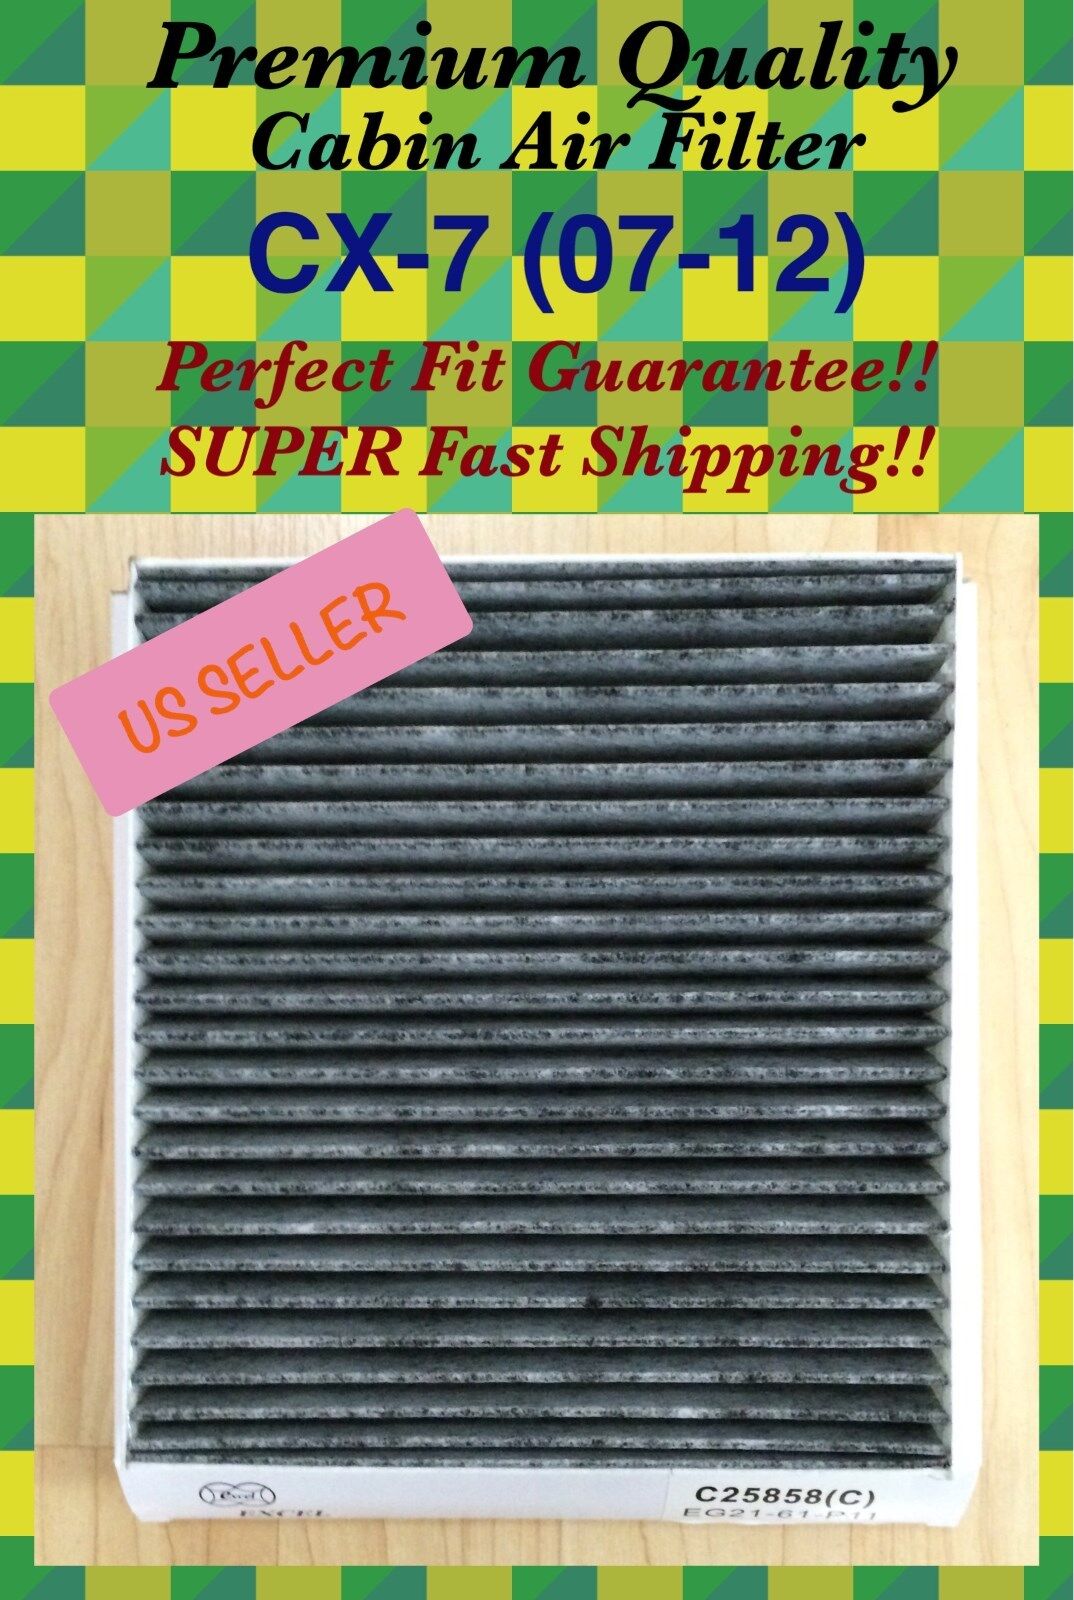 Carbonized CABIN AIR FILTER For Mazda CX-7 07-12 Mazdaspeed6 06-08 Great Fit